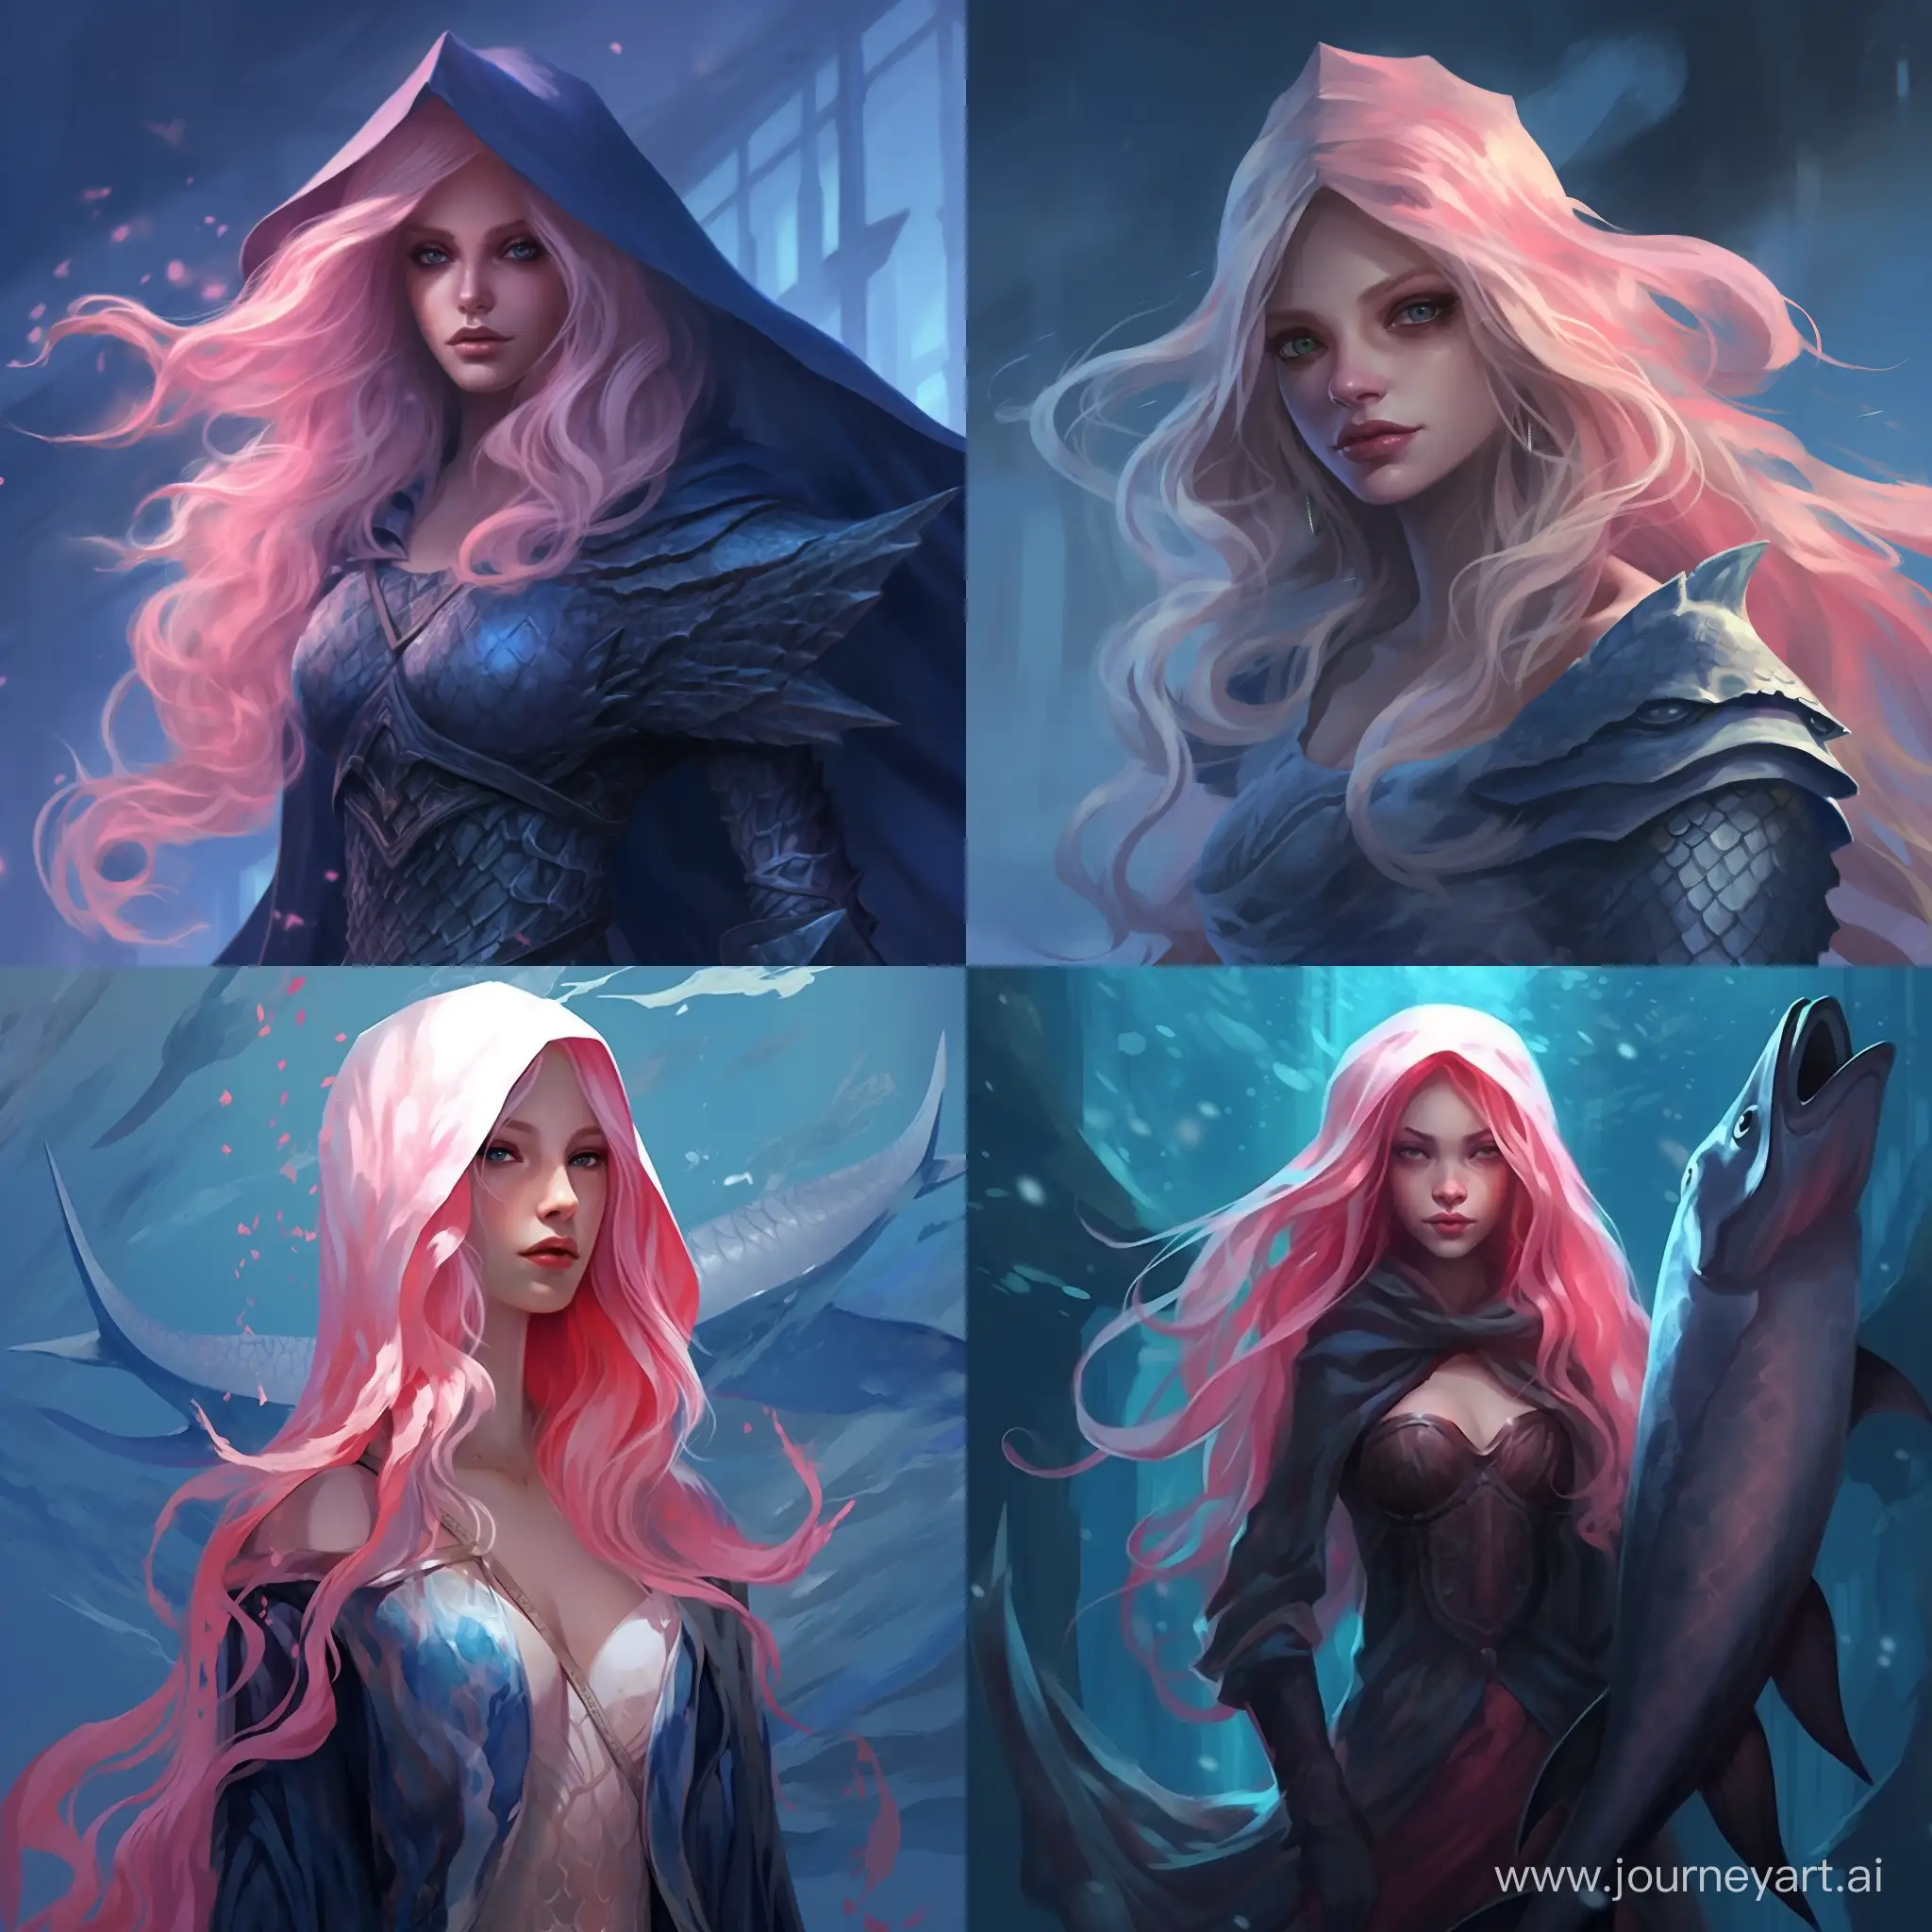 give me a high fantasy young mermaid with pink hair and blue tips. princess with a hooded cloak and celestial magic. dangerous yet innocent, hiding her true evil. tail is shark fins instead of typical mermaid tail